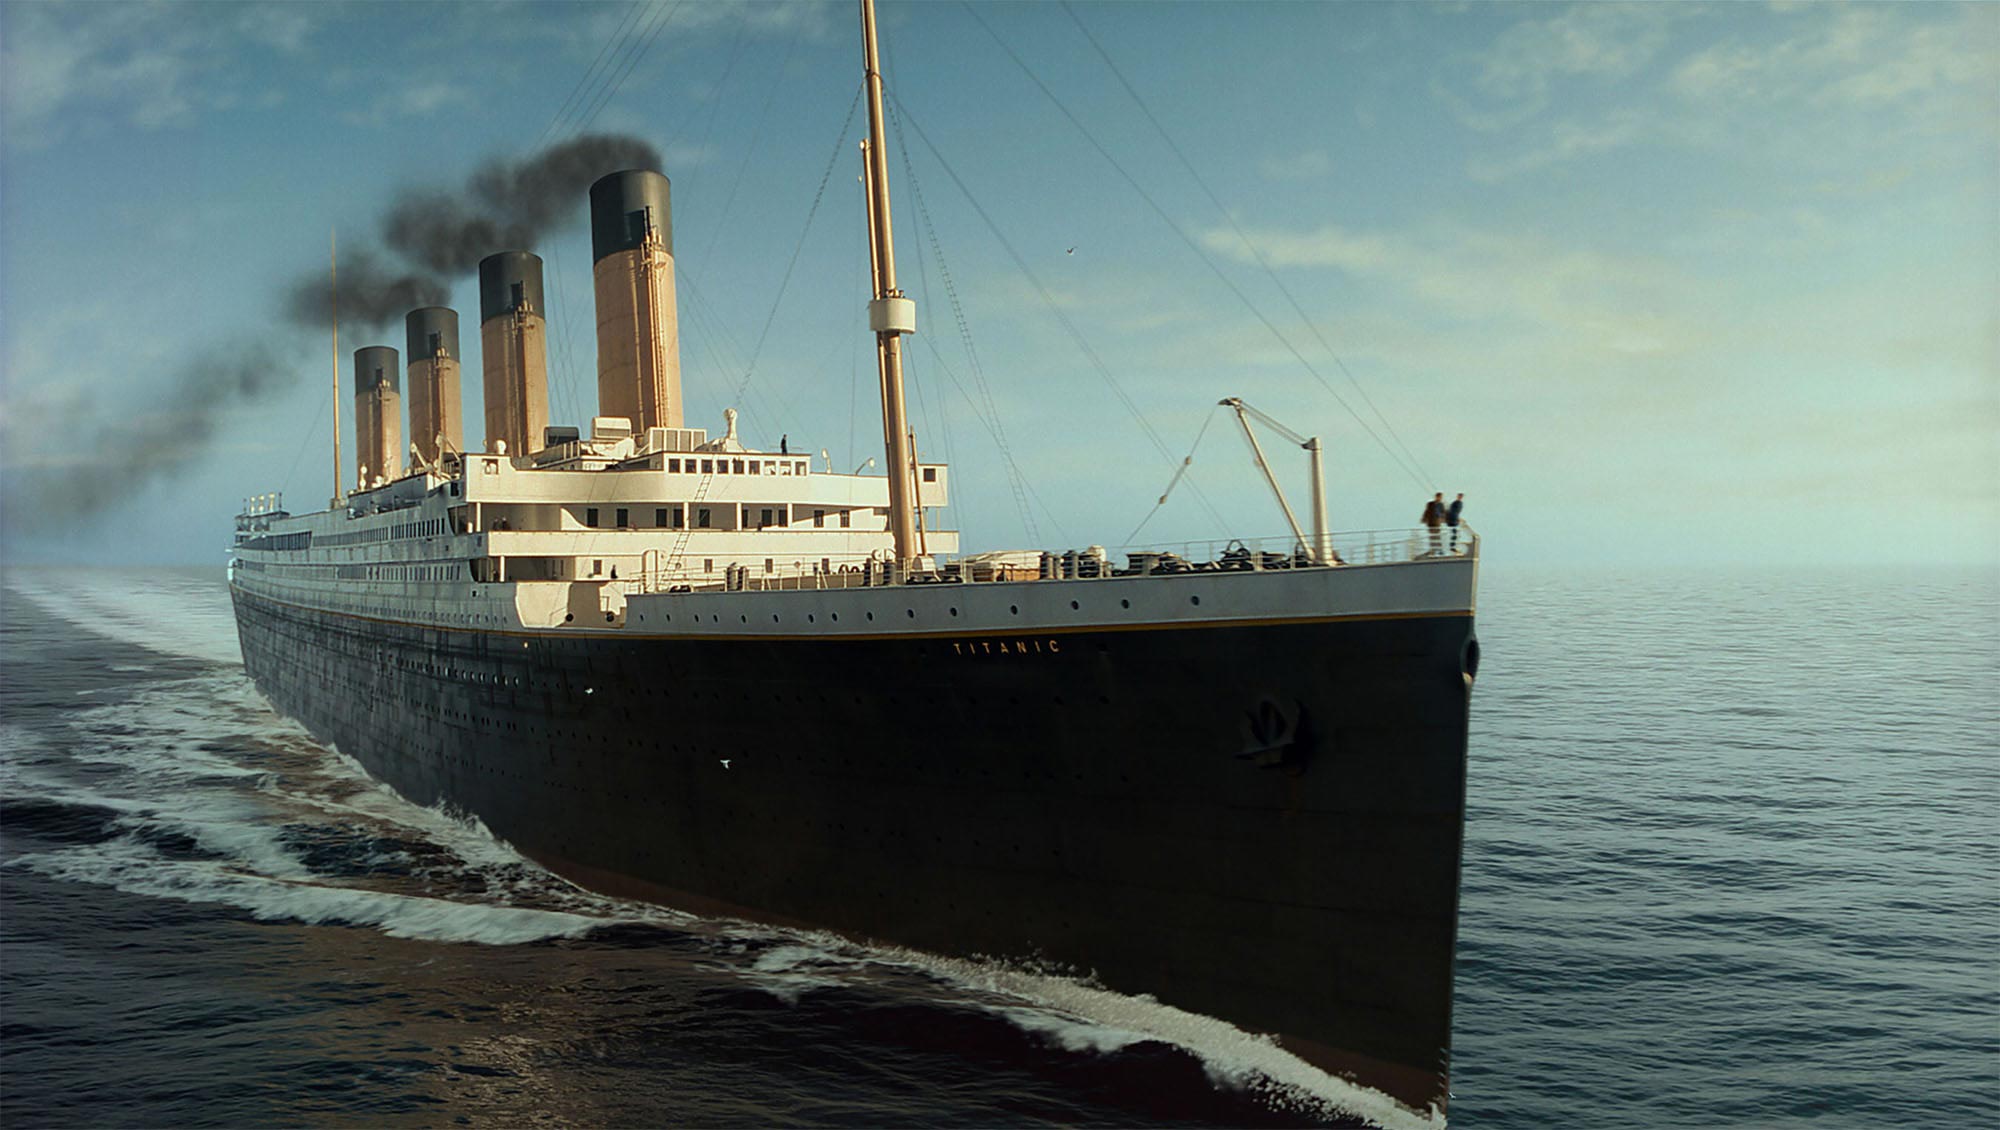 Cameron S Titanic Fifteen Years On A Critical Re Appraisal